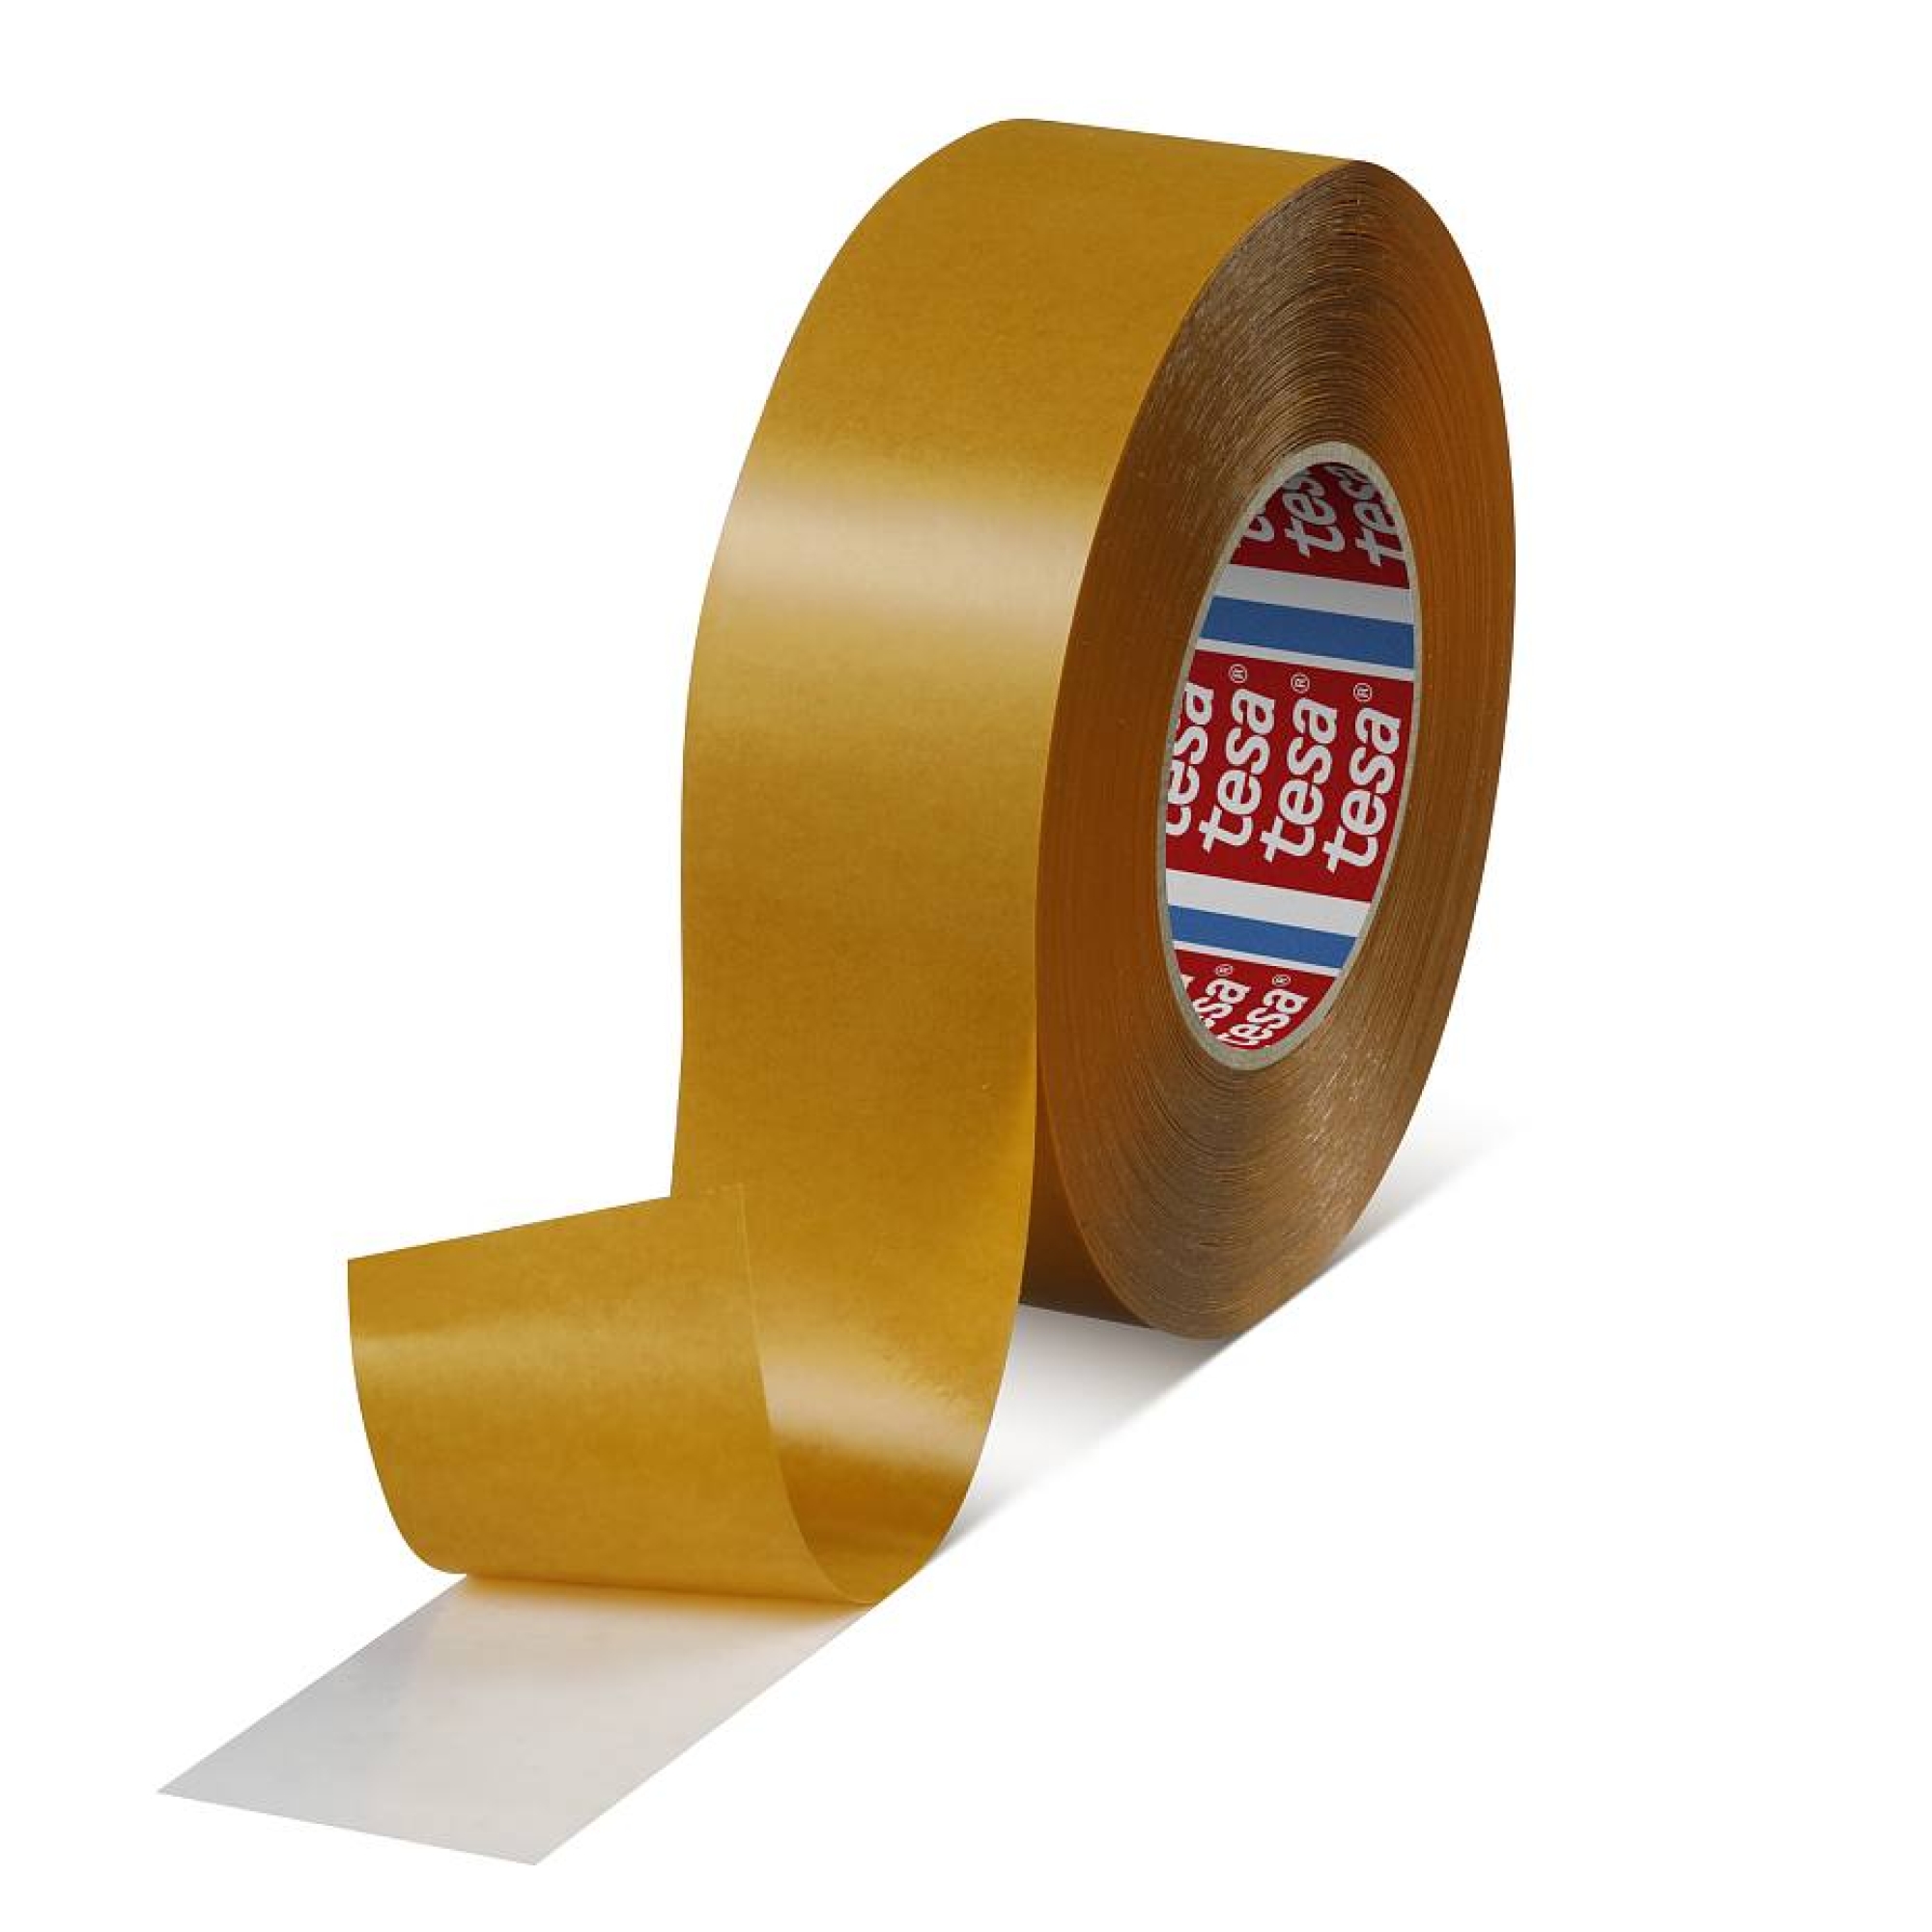 https://seyffer.shop/images/product_images/info_images/tesa-51970-double-sided-filmic-tape-transparent-519700001600-pr-787426_canvas1x1_9_13689_0_13690_0_13700_0_13701_0_13702_0_13703_0_13704_0_13705_0.jpg